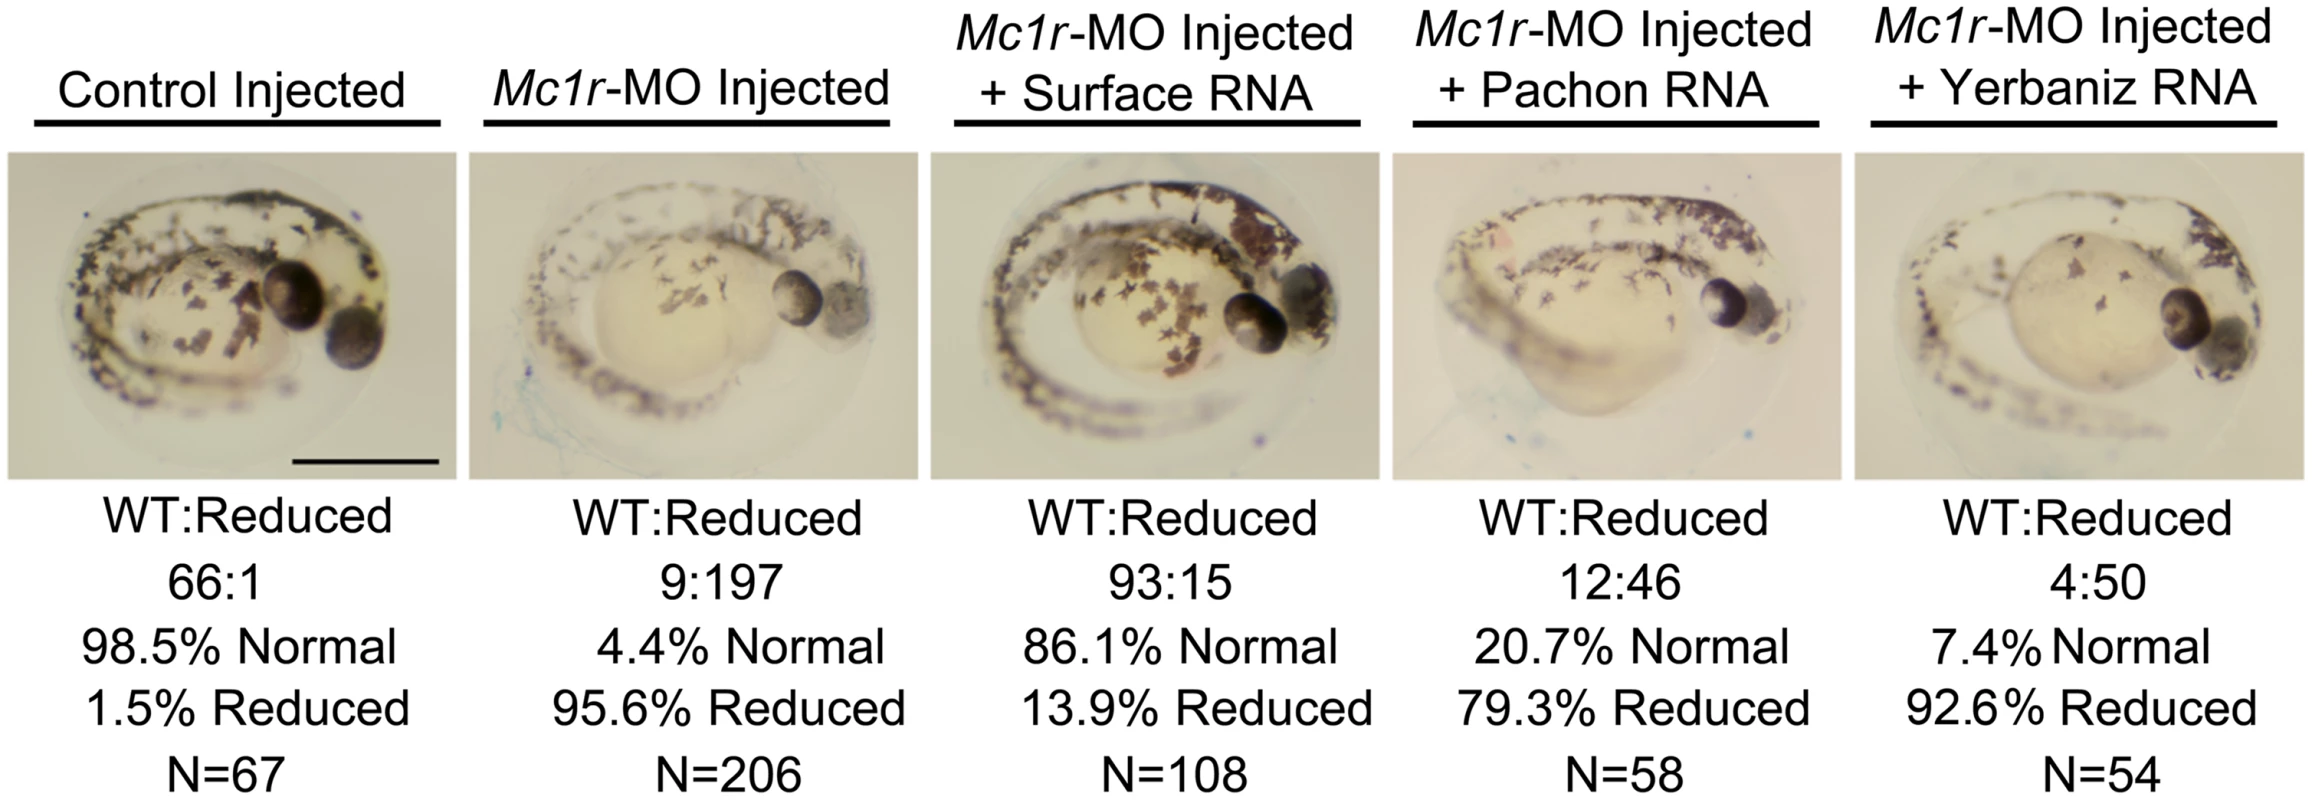 The brown mutation is recapitulated in <i>Mc1r</i>-MO knockdown experiments and is rescued by the Surface form of <i>Mc1r</i> in the zebrafish.